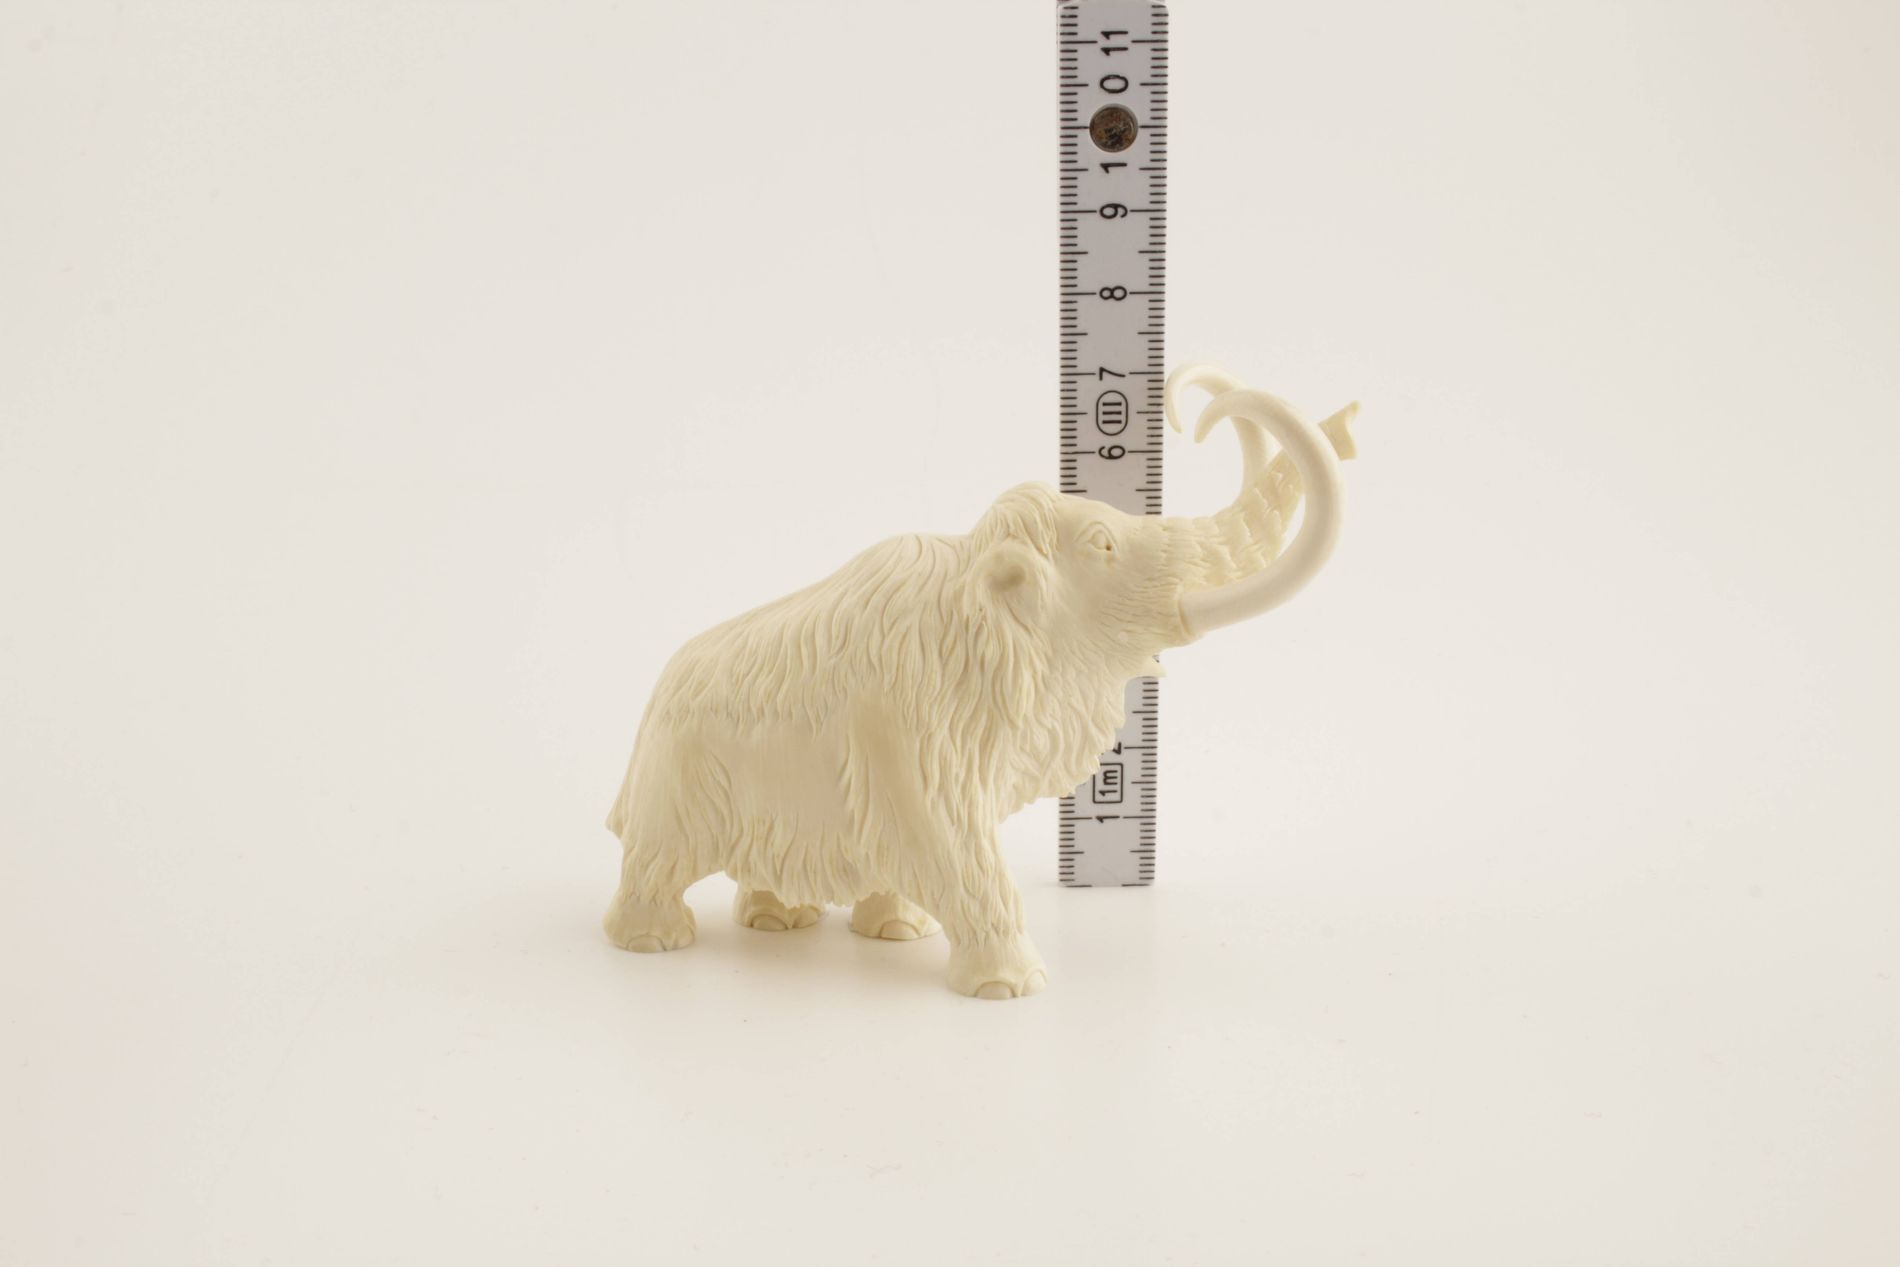 Carved woolly mammoth figurine